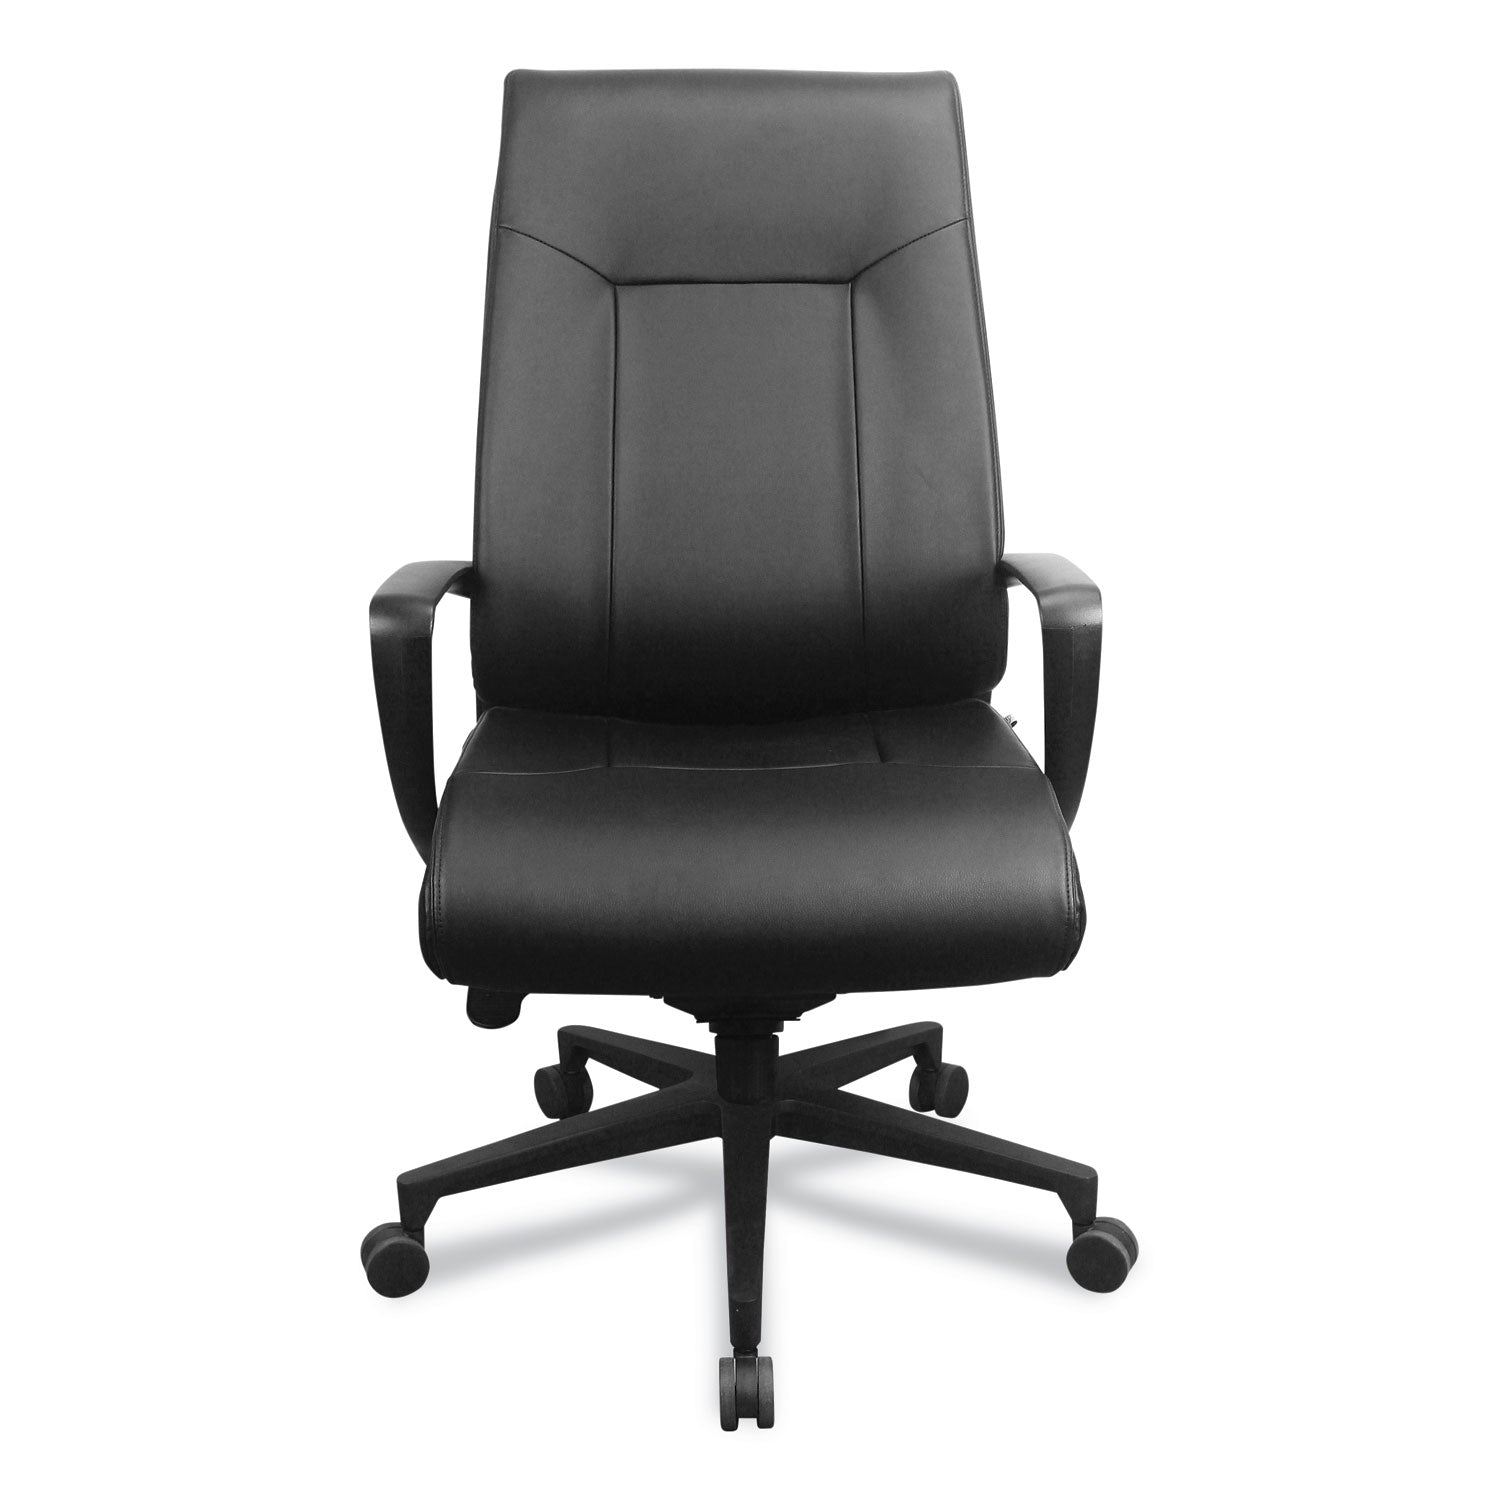 executive-chair-supports-up-to-250-lbs-205-to-235-seat-height-supports-up-to-250-lbs-black_tmetp2500blkl - 1